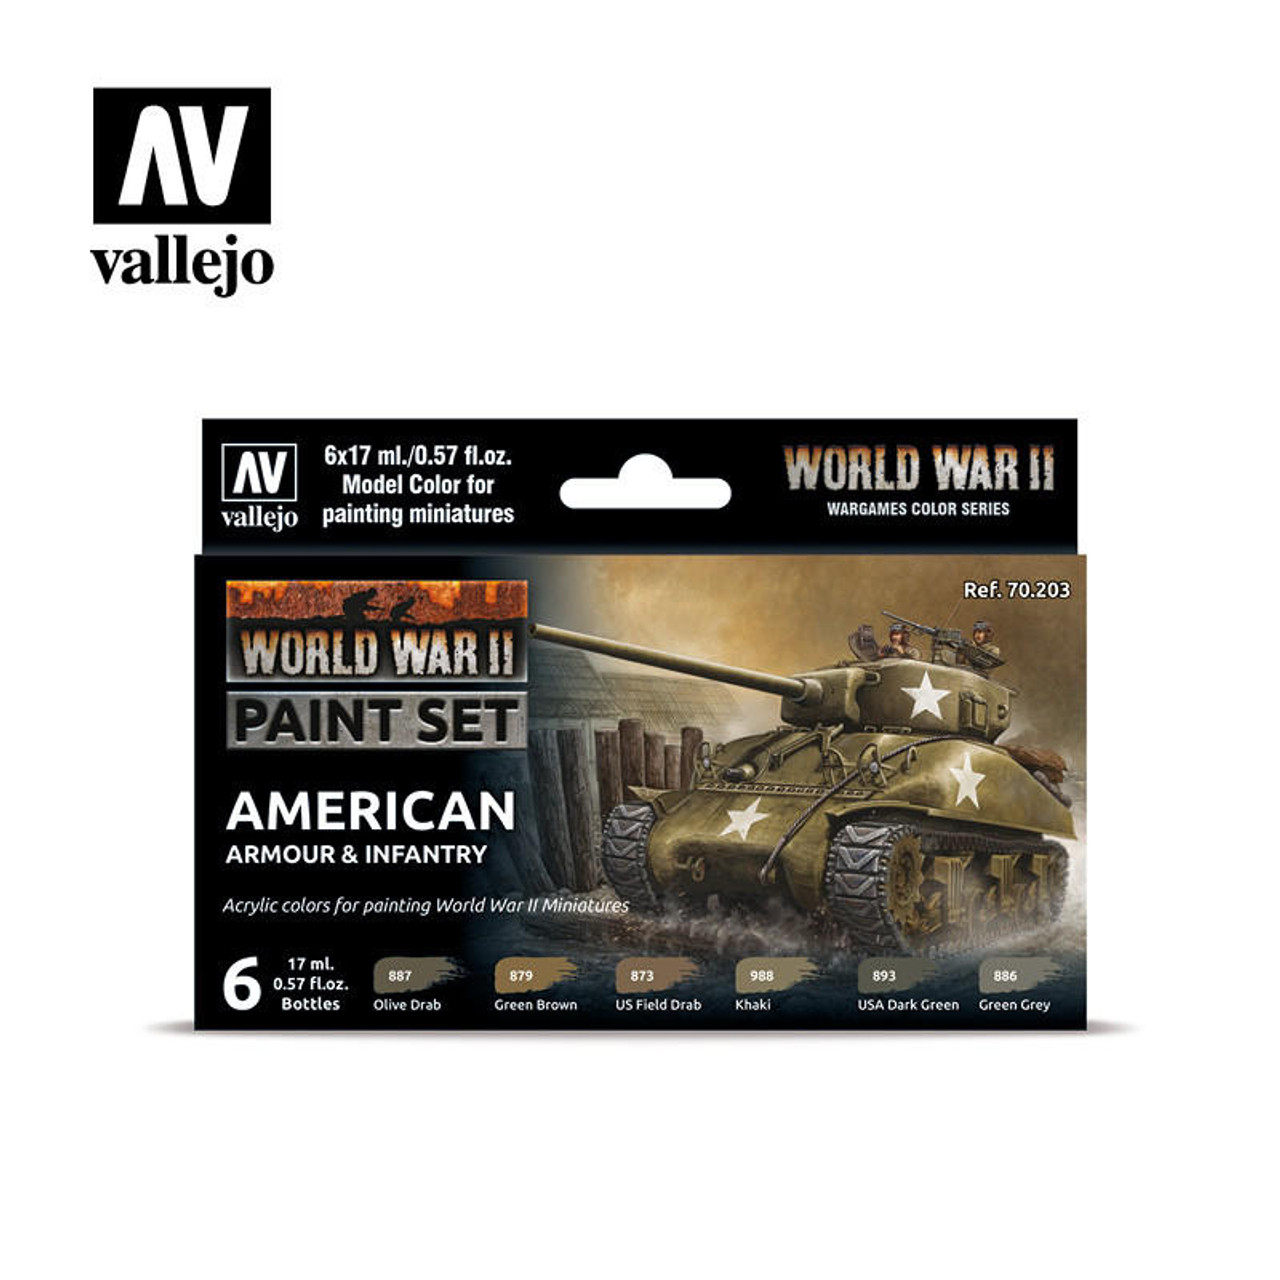 Buy Vallejo Basic USA Colors Paint Set, 17ml Online at Low Prices